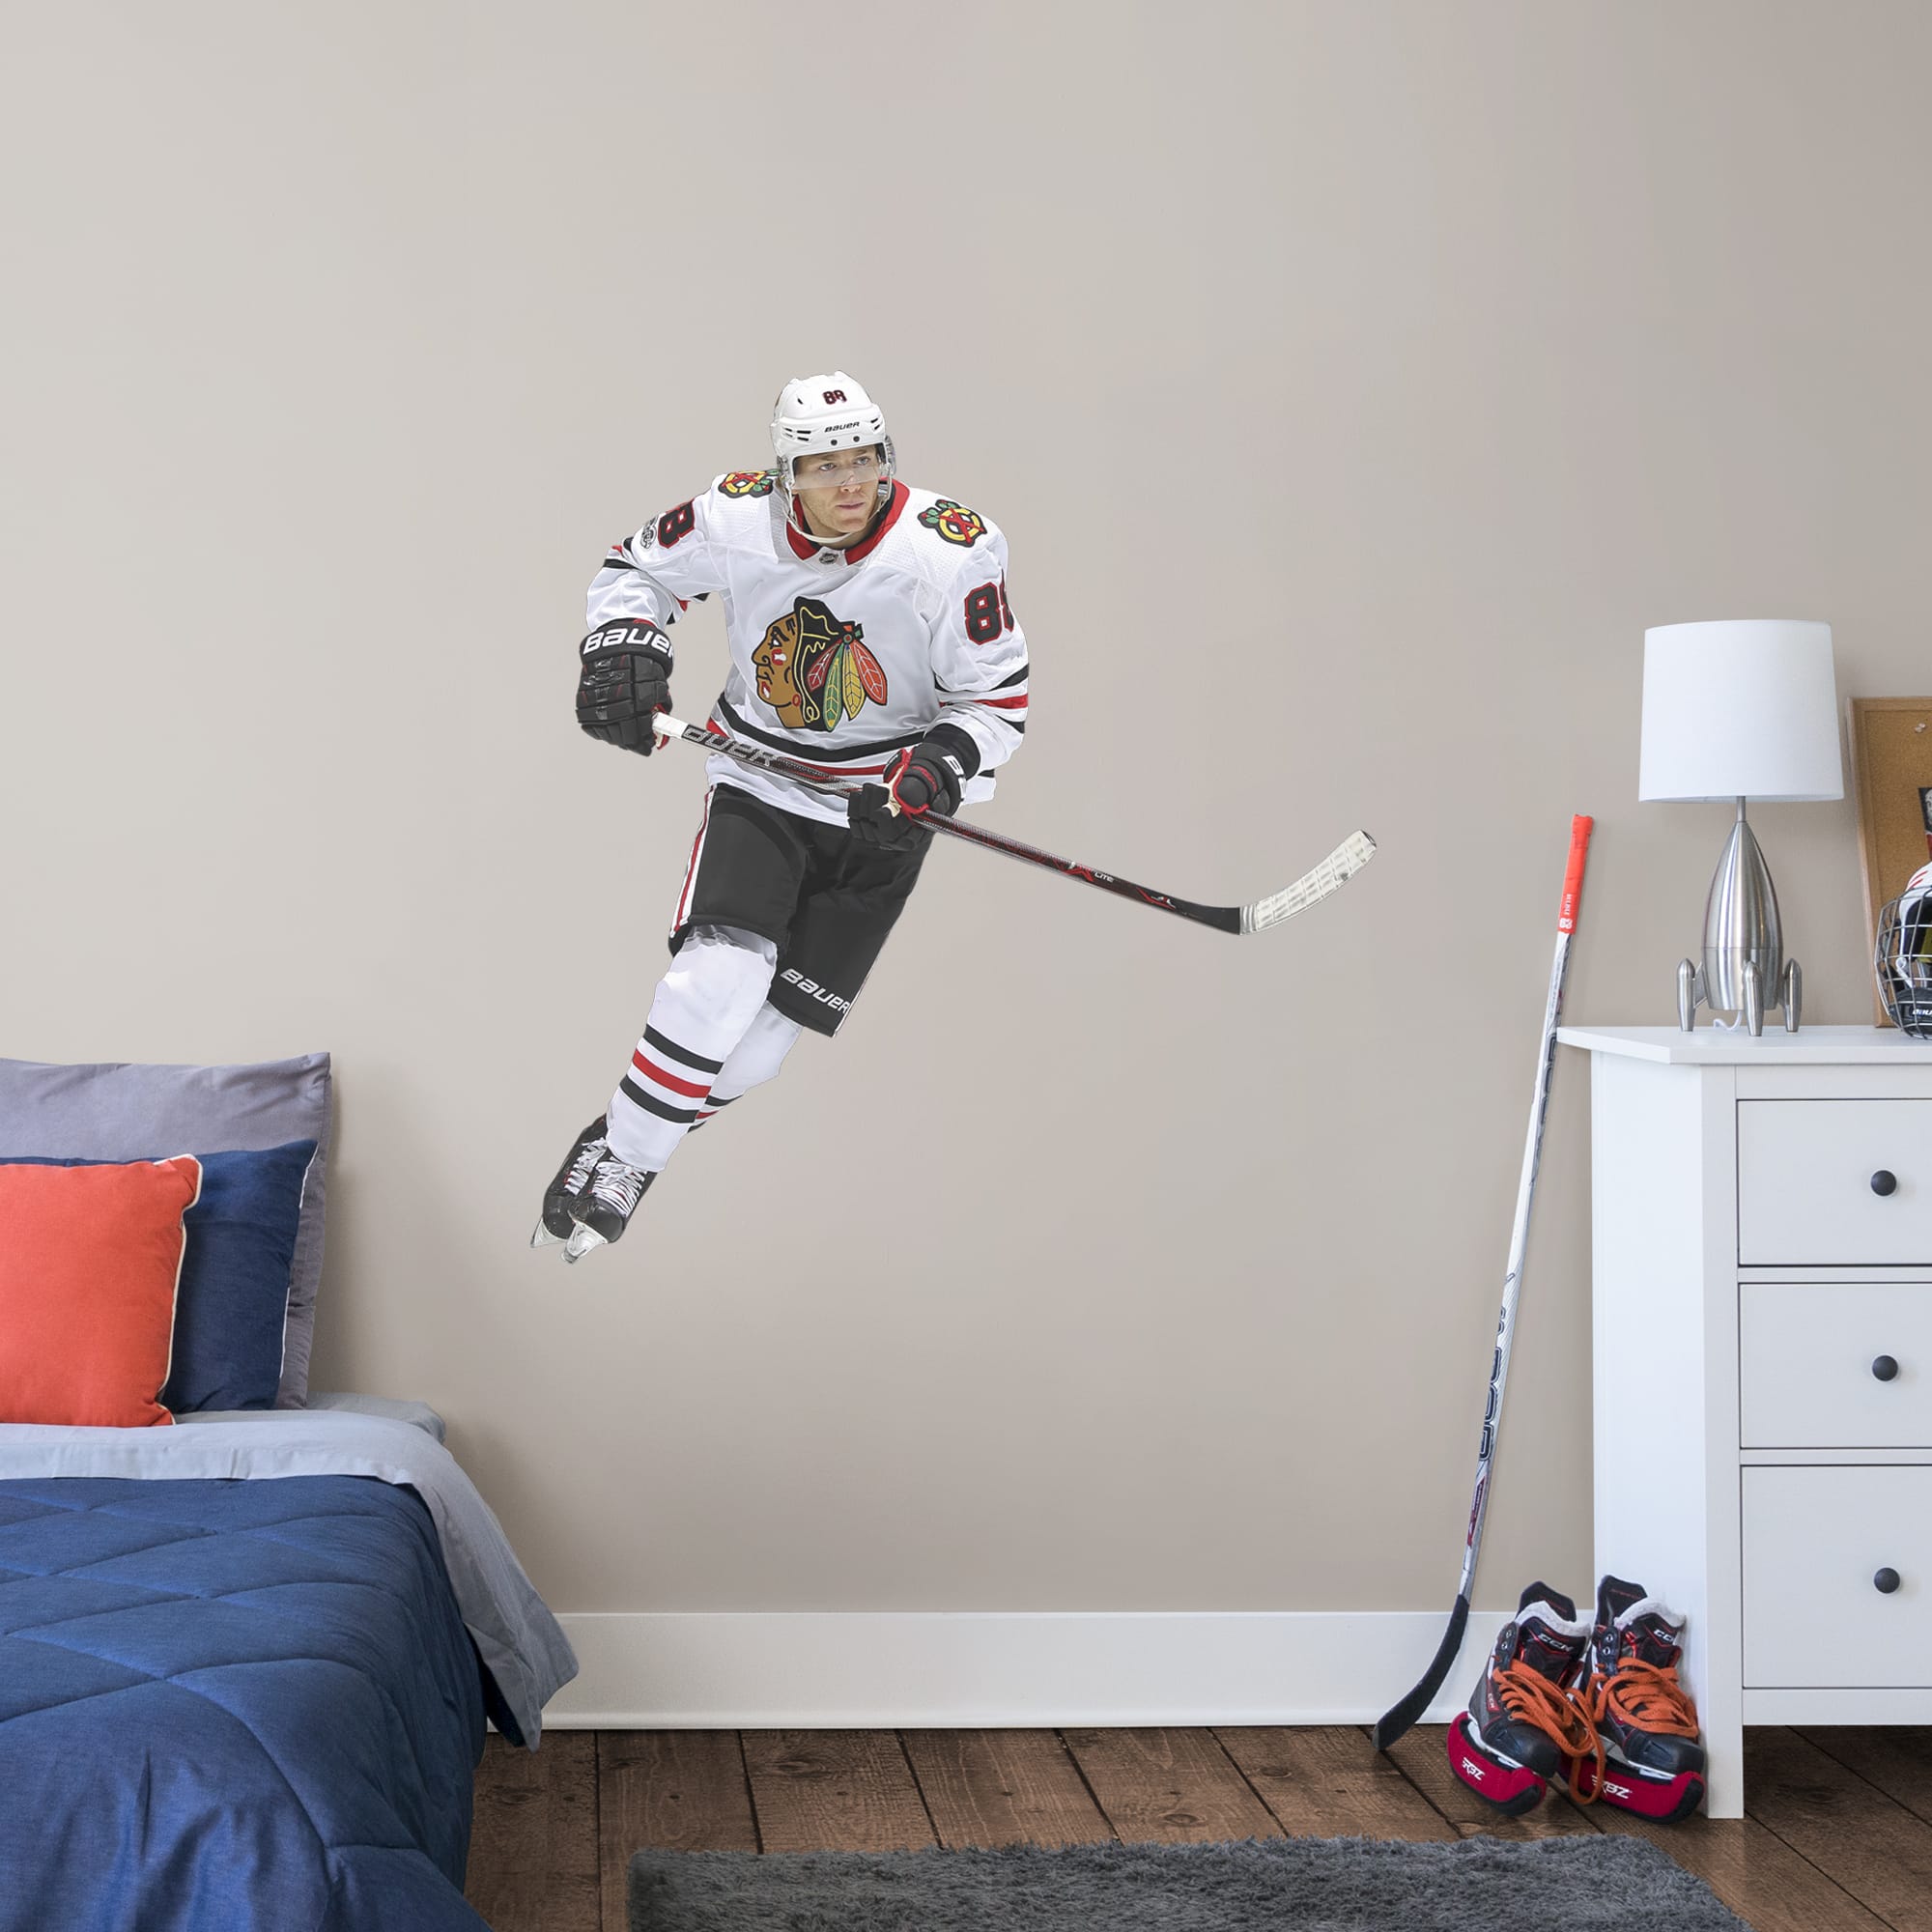 Patrick Kane for Chicago Blackhawks - Officially Licensed NHL Removable Wall Decal Giant Athlete + 2 Decals (52"W x 47"H) by Fat